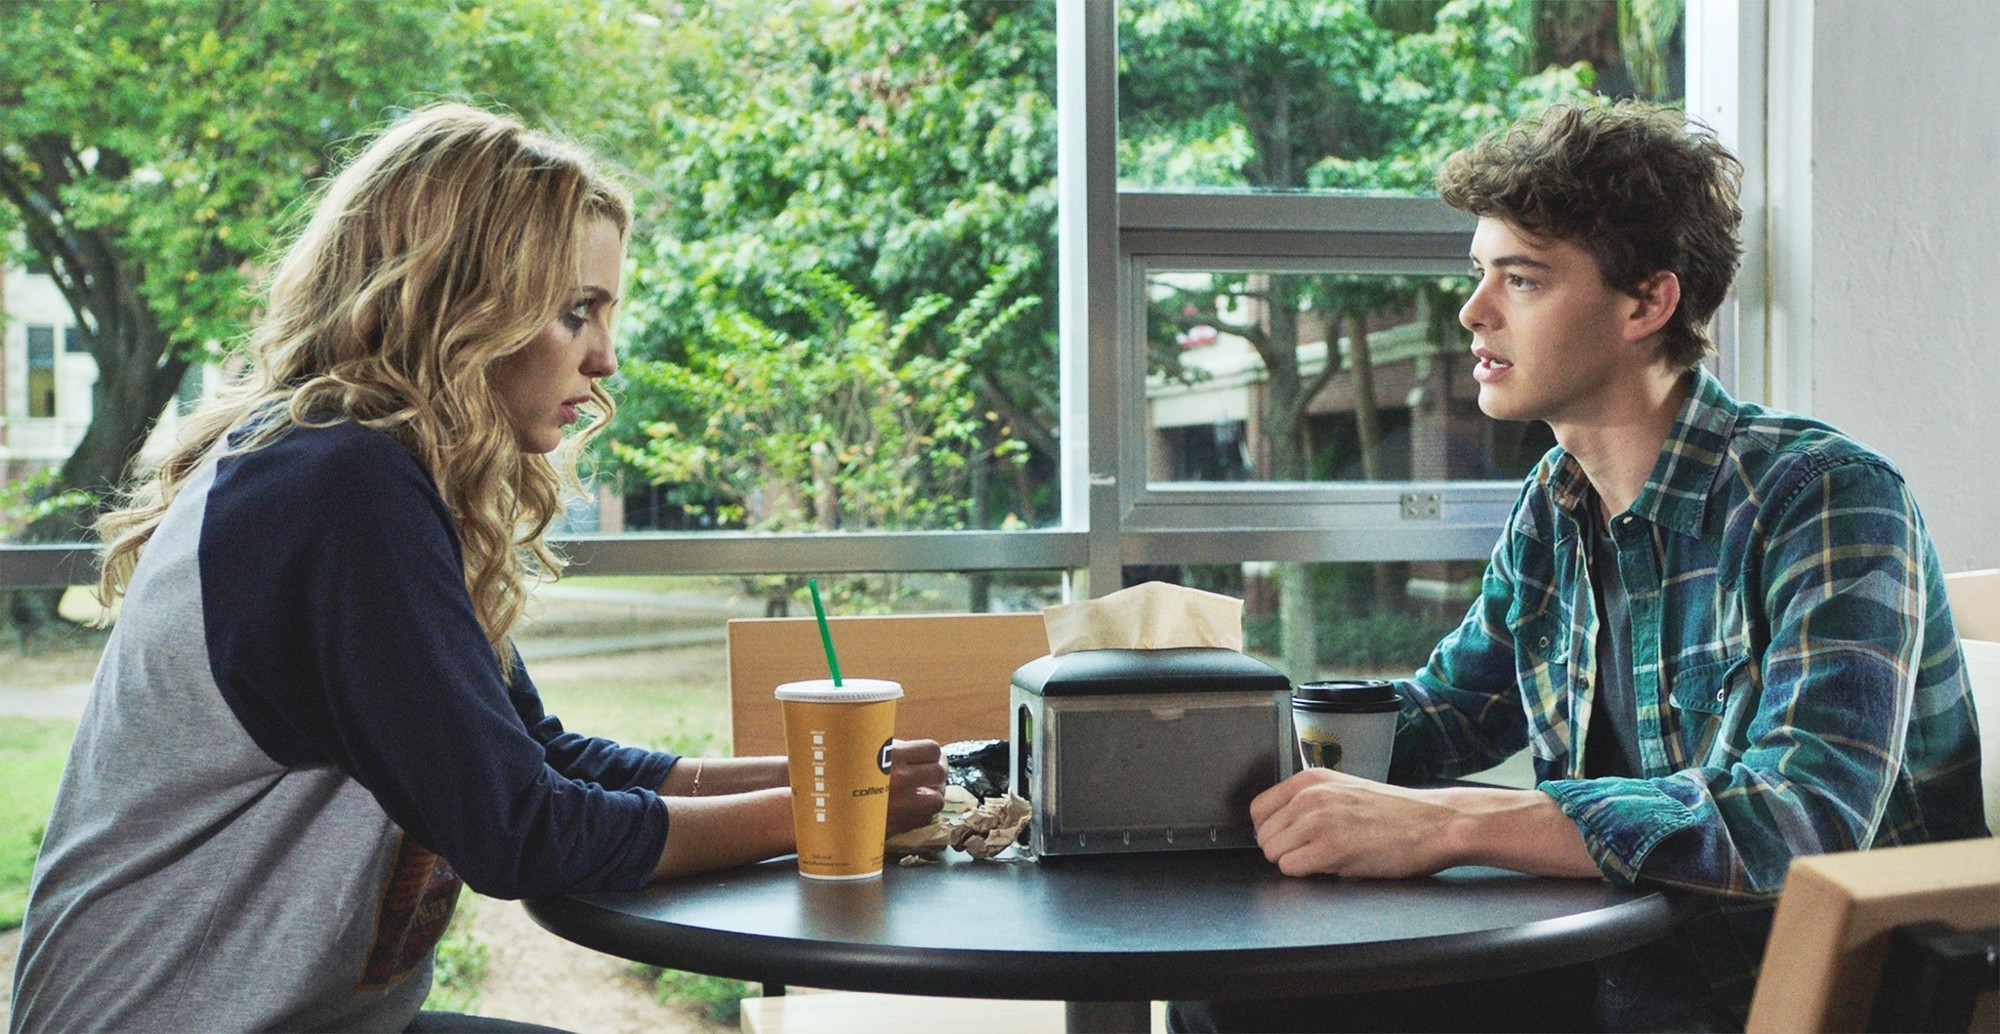 Jessica Rothe stars as Tree Gelbman and Israel Broussard stars as Carter Davis in Universal Pictures' Happy Death Day (2017)